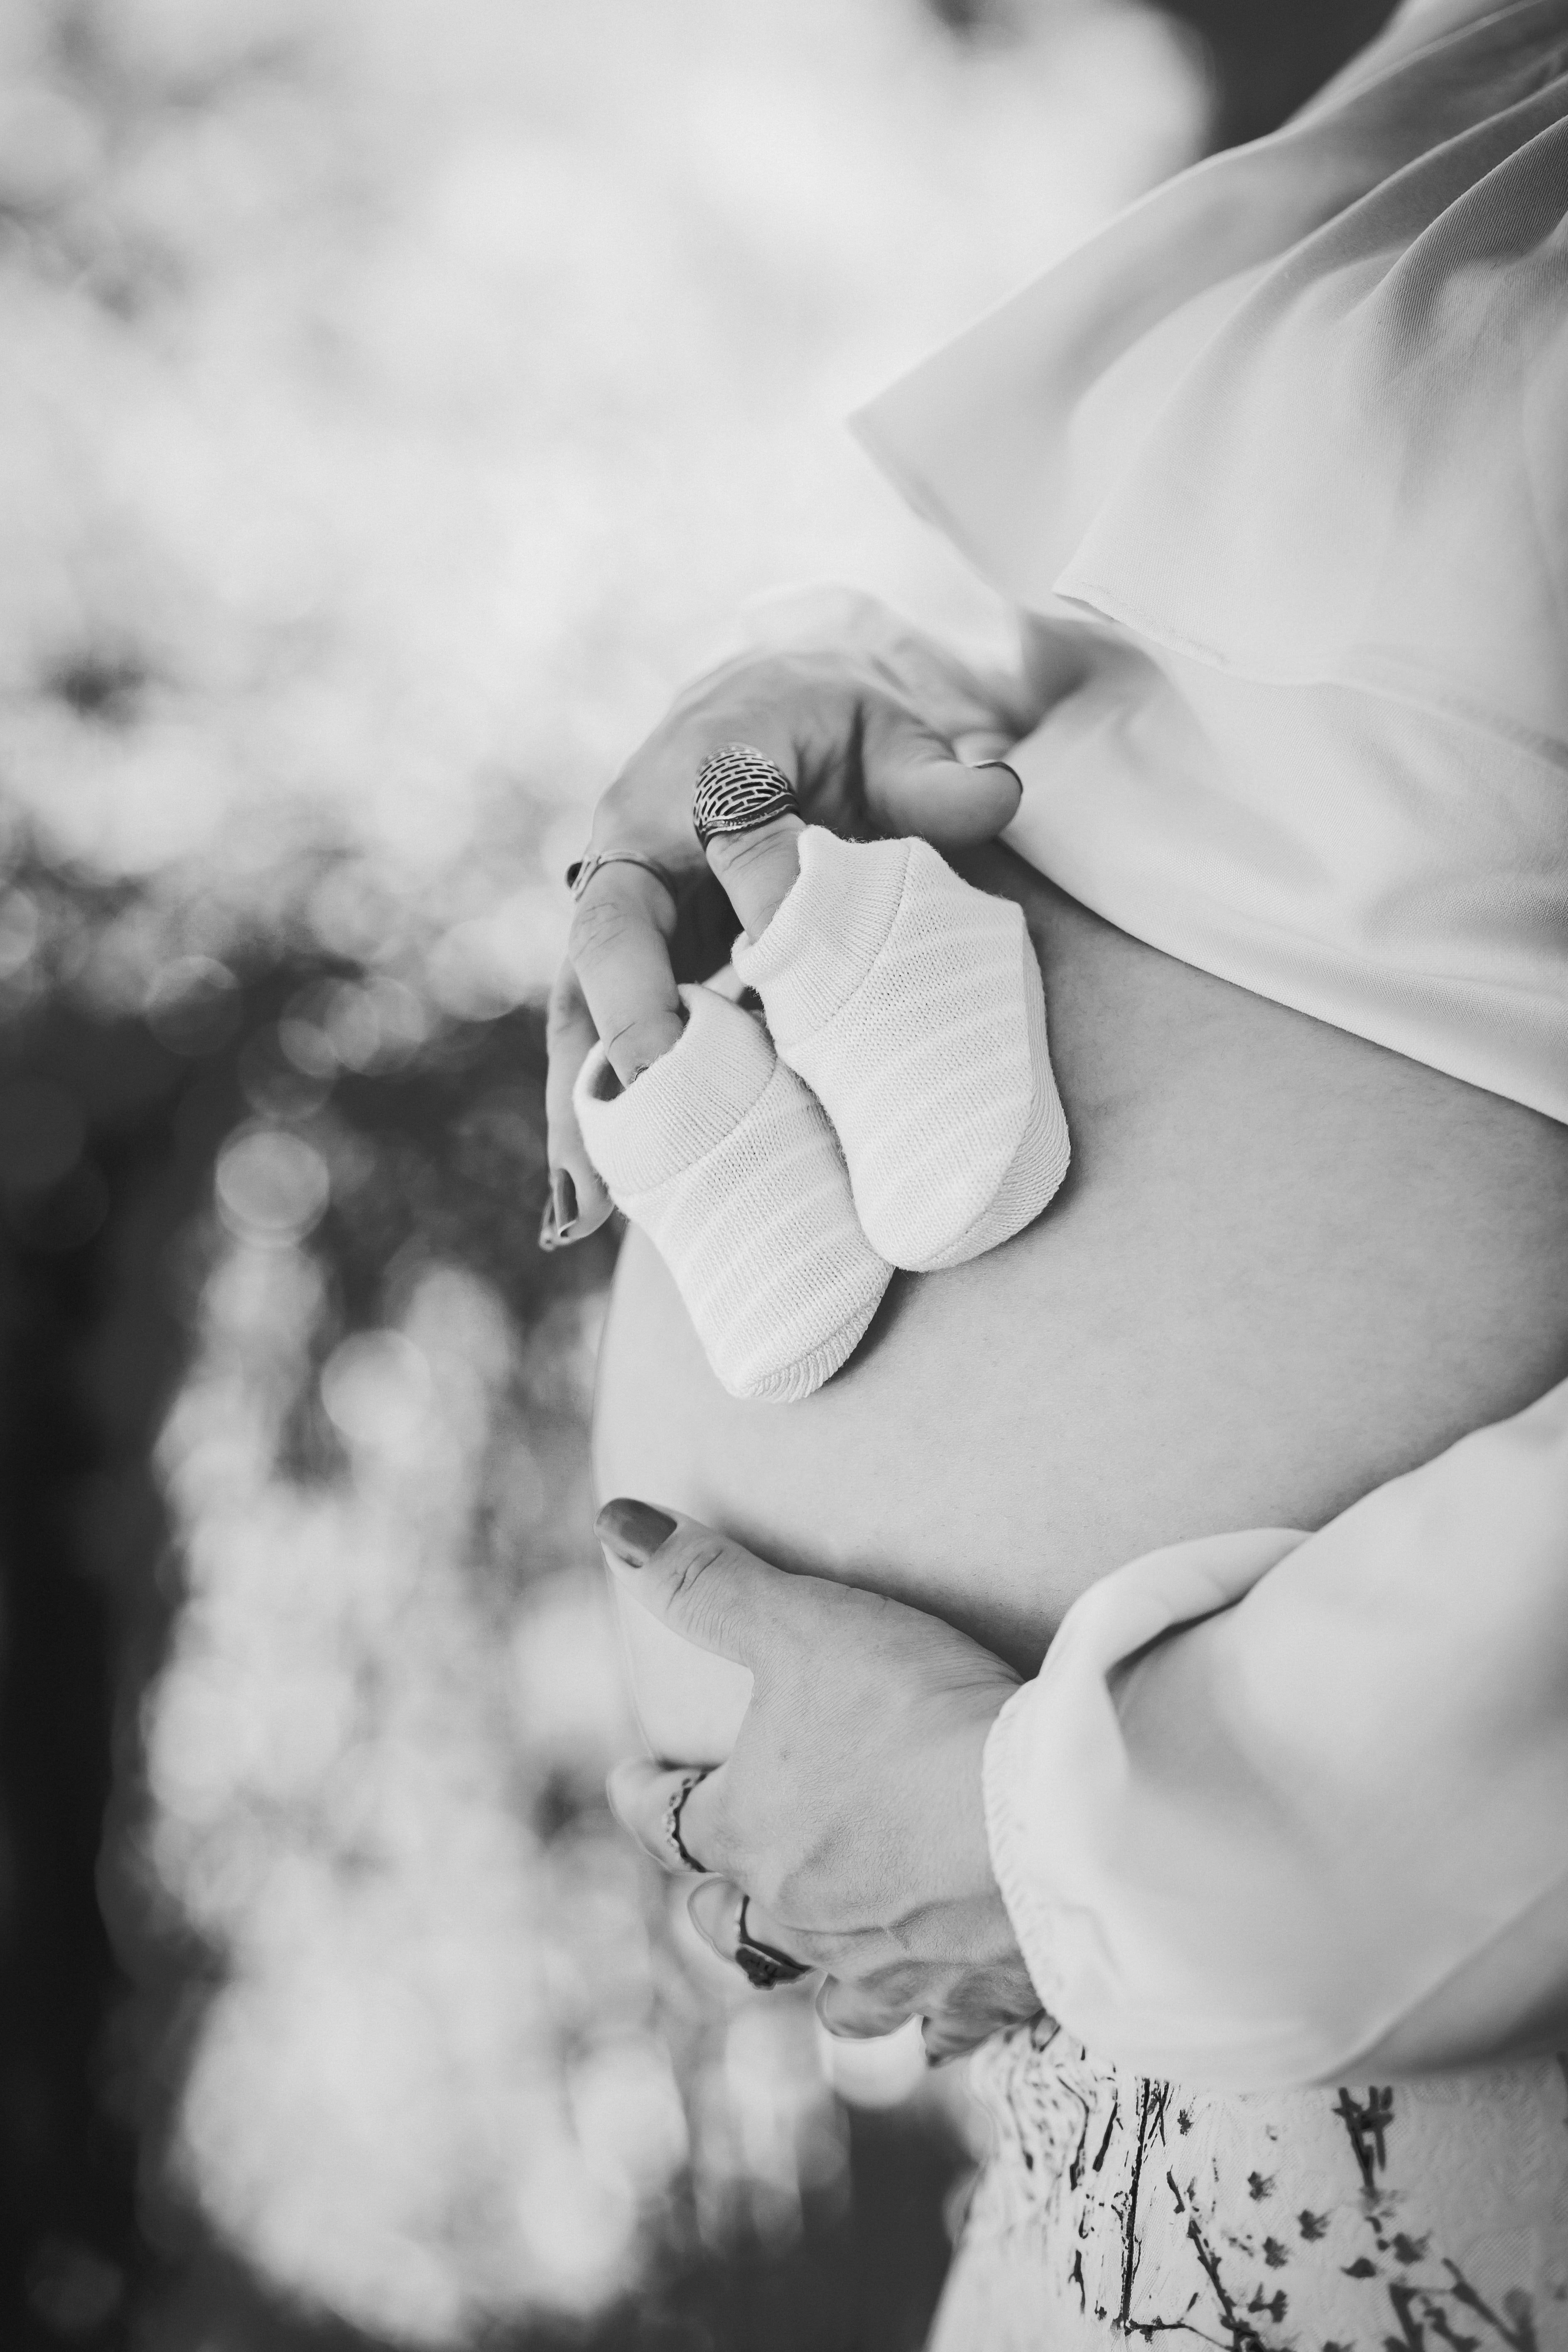 Grayscale photo of pregnant belly. | Source: Pexels